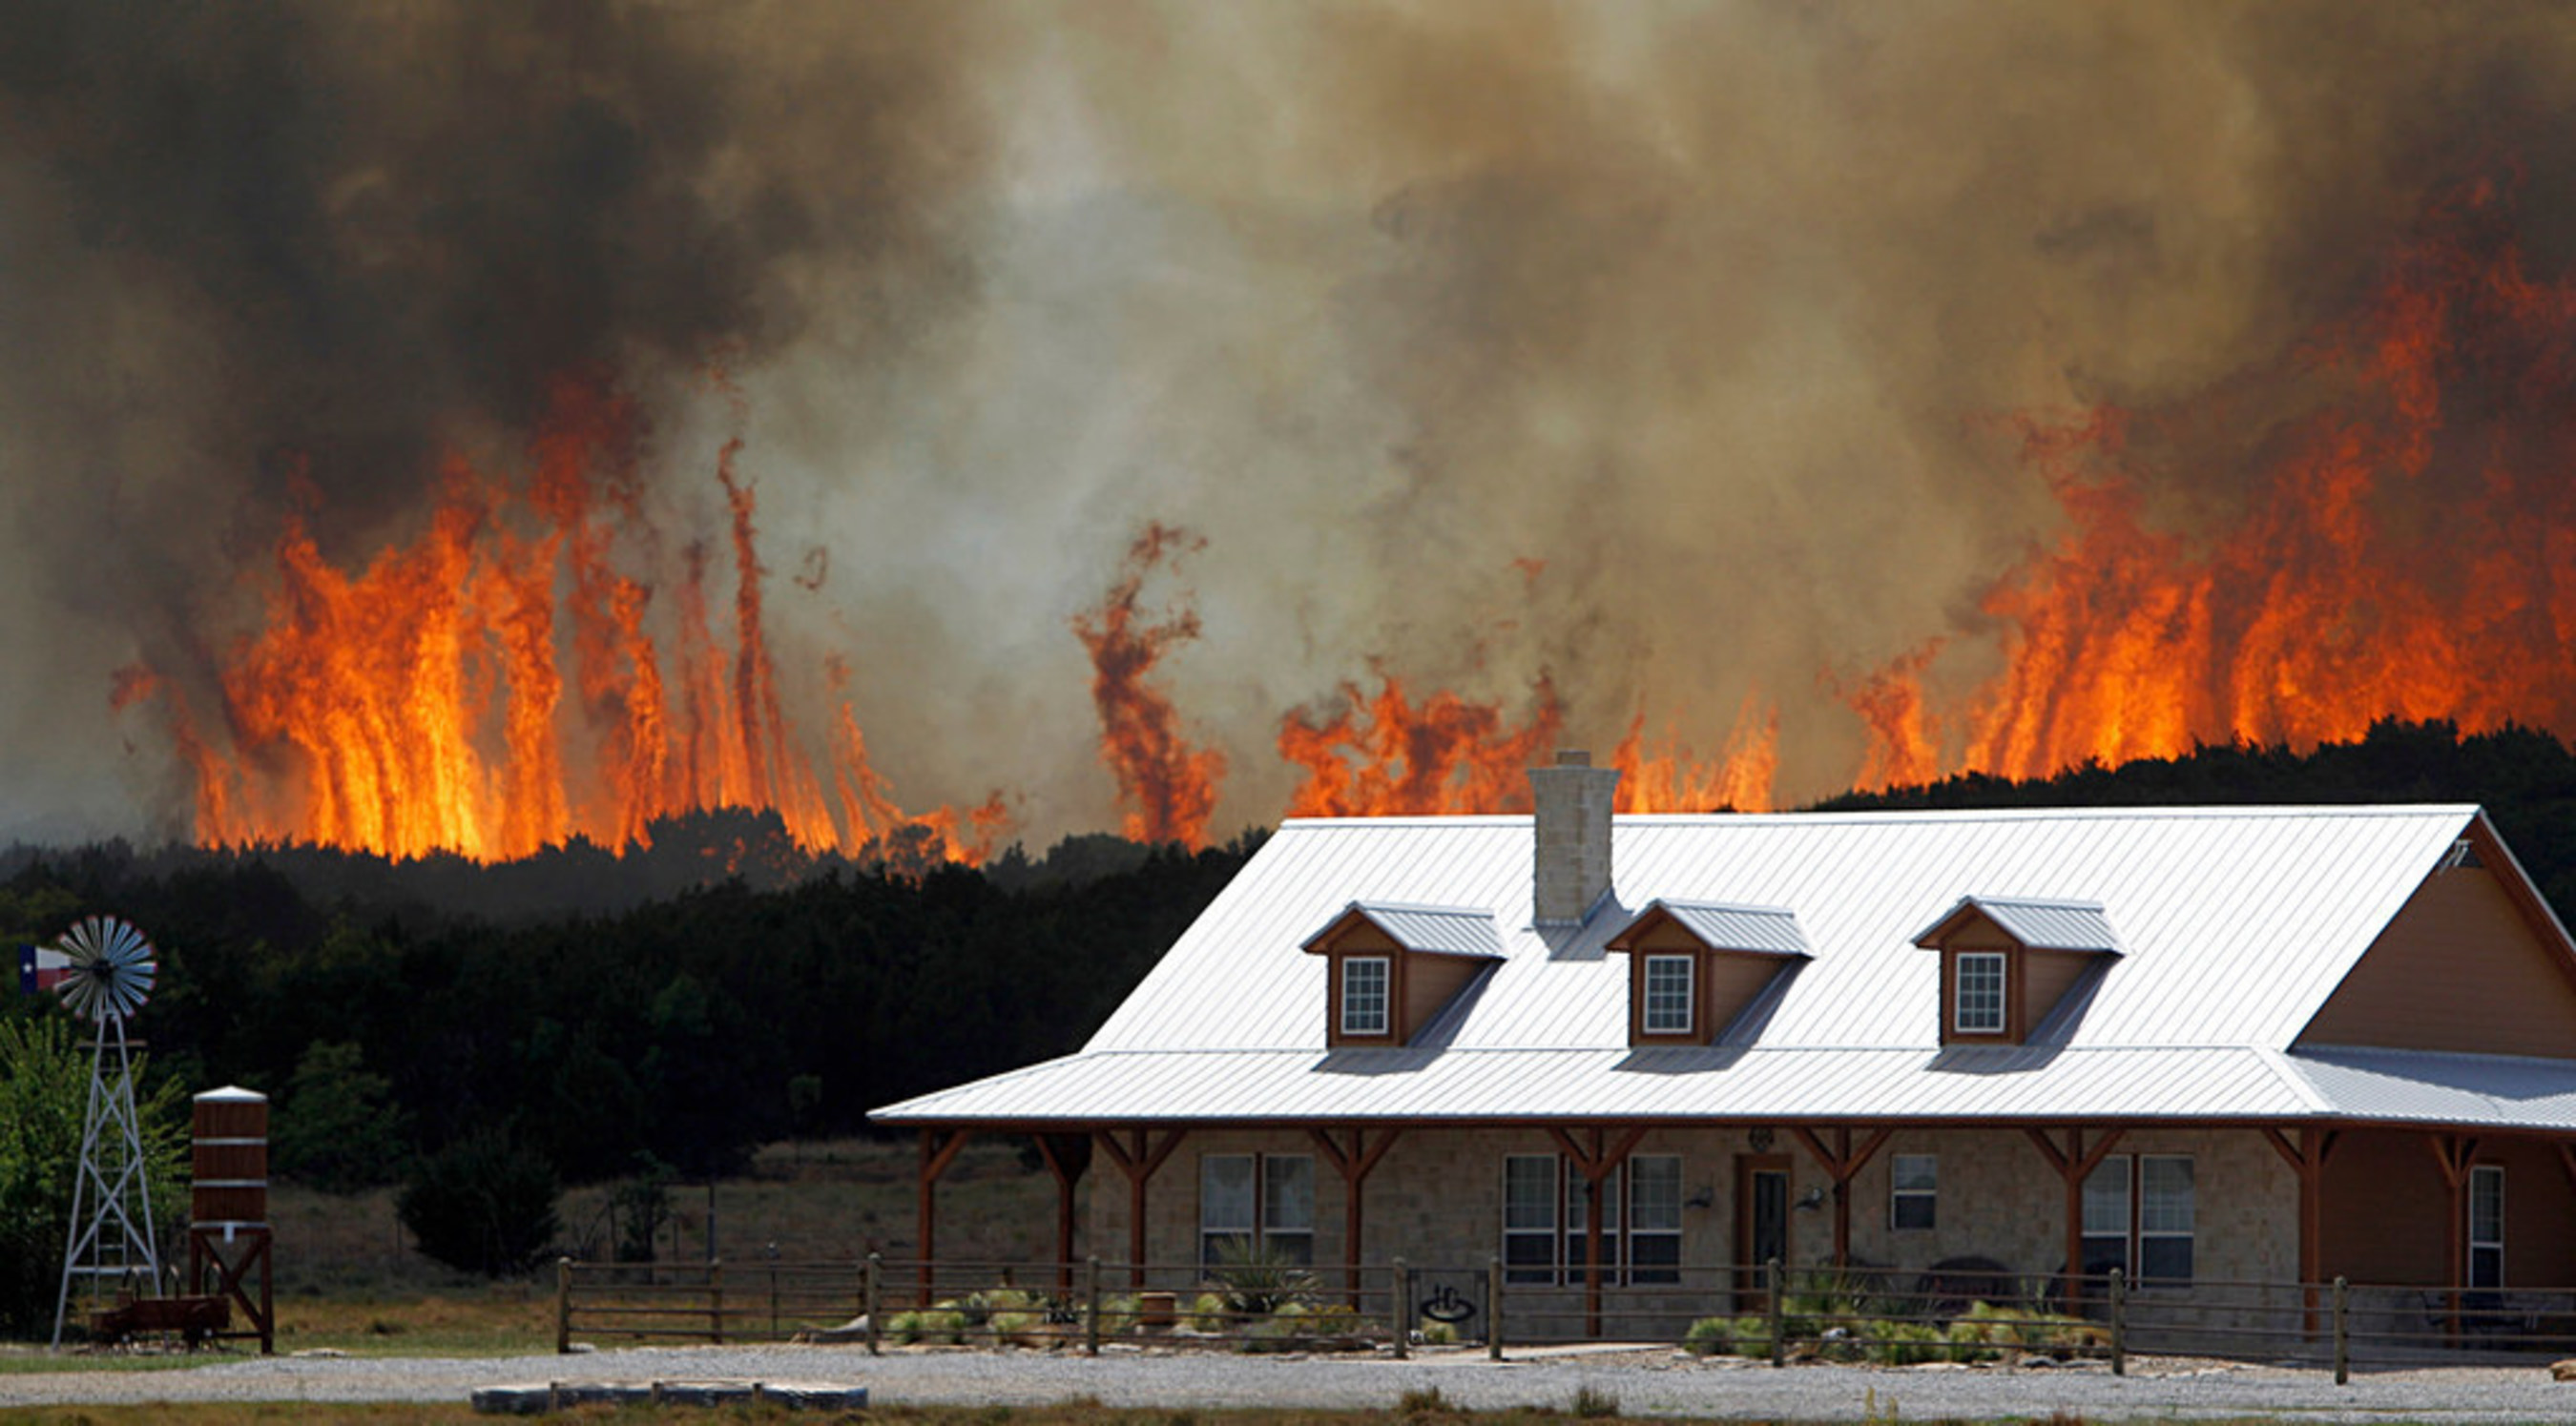 State Farm and NFPA remind communities to be prepared for wildfires. (PRNewsFoto/State Farm)